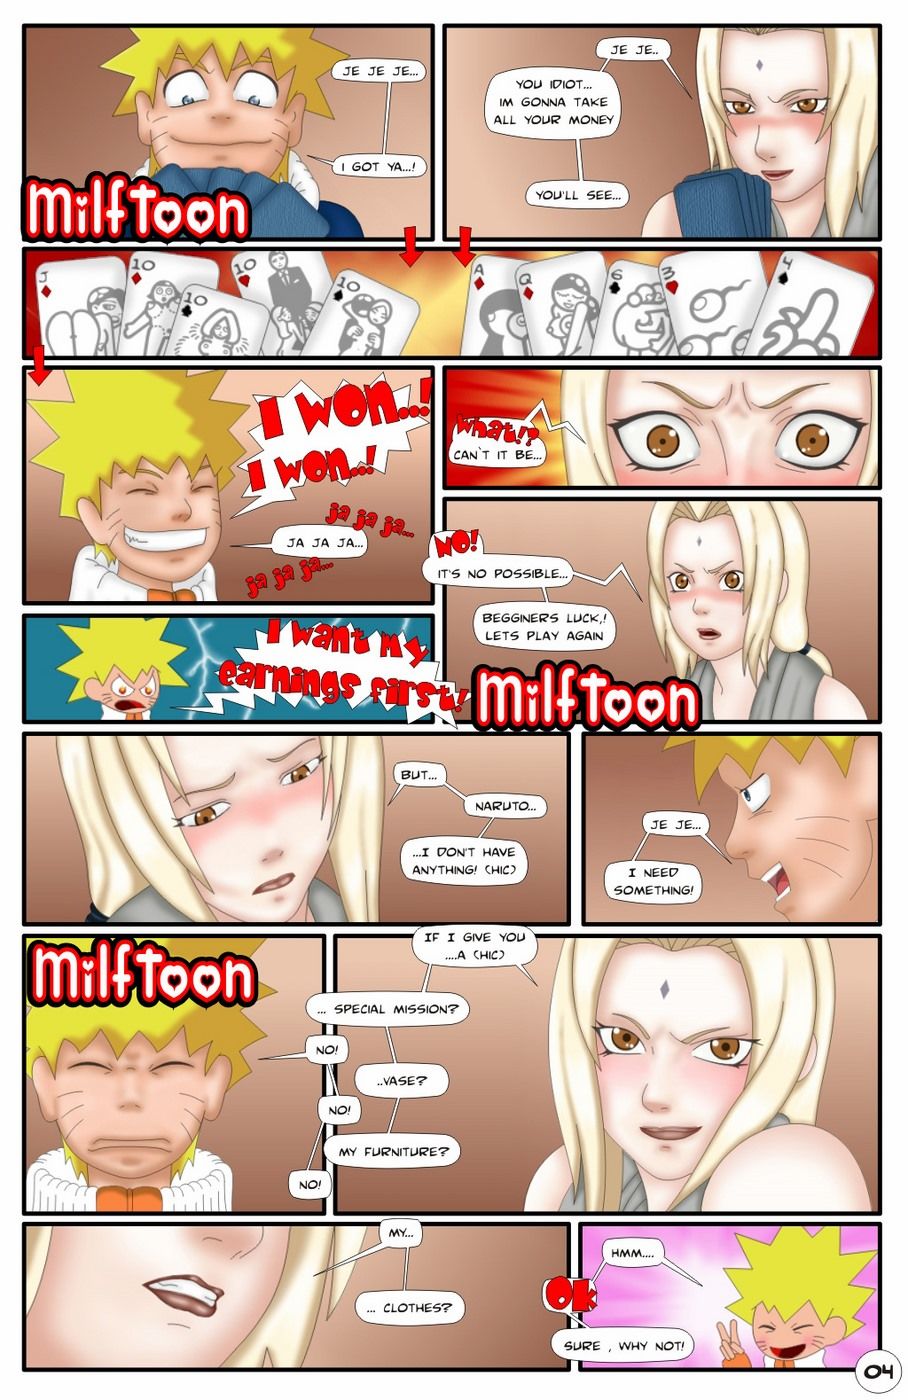 milftoon Naruto page 1